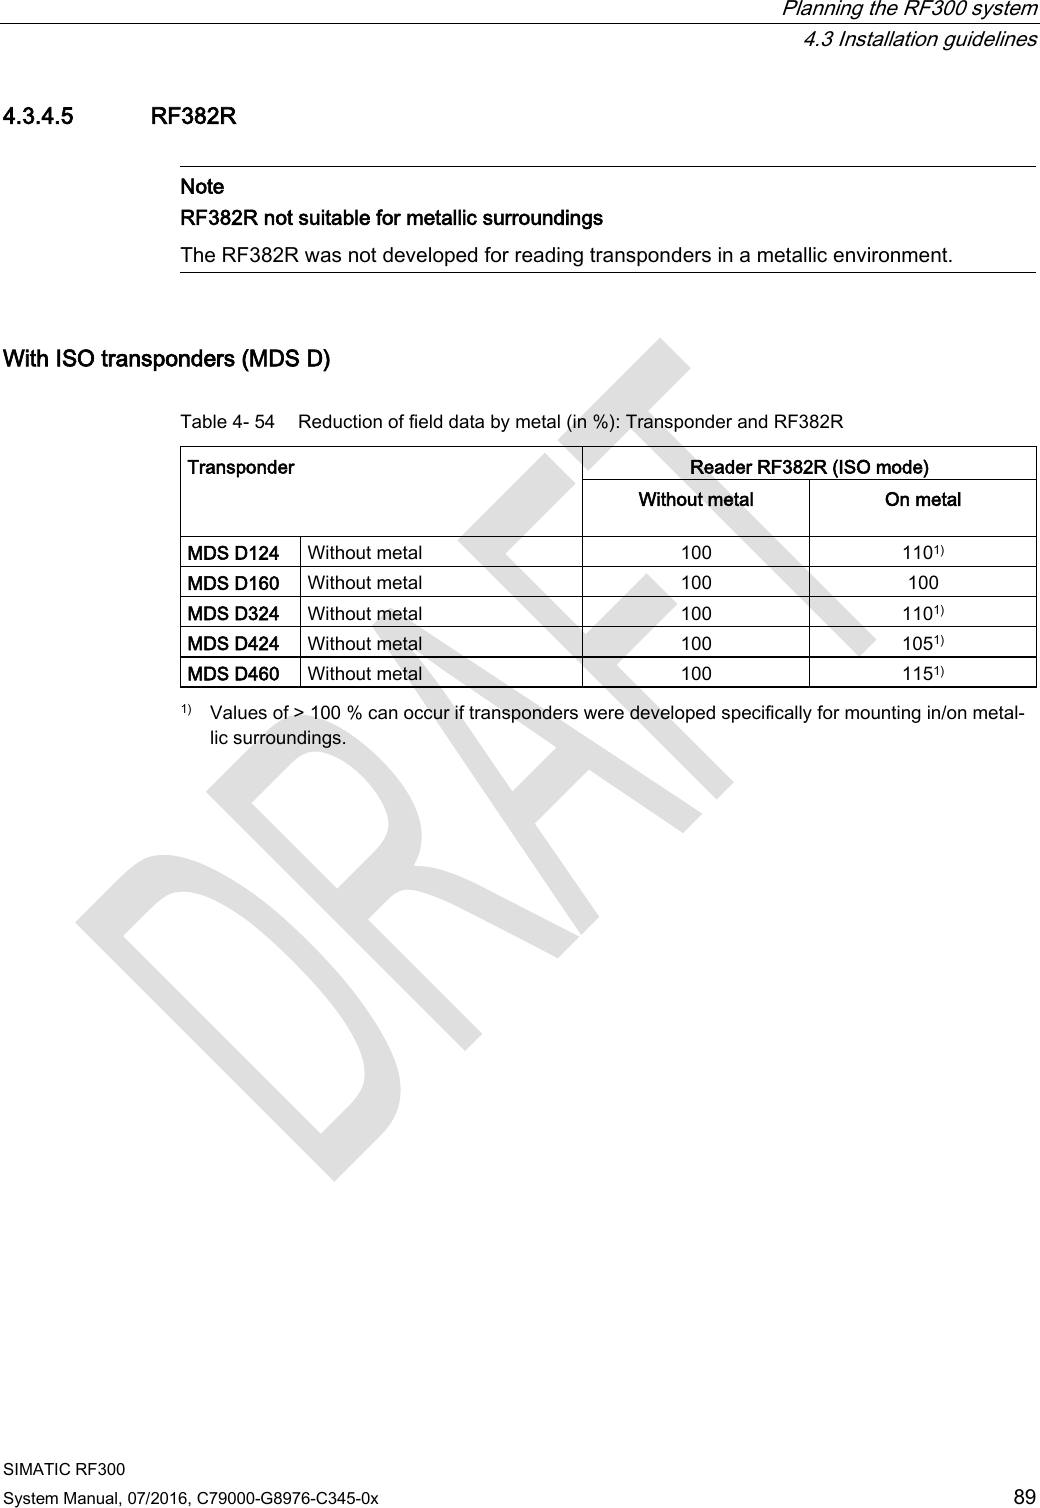  Planning the RF300 system  4.3 Installation guidelines SIMATIC RF300 System Manual, 07/2016, C79000-G8976-C345-0x 89 4.3.4.5 RF382R   Note RF382R not suitable for metallic surroundings The RF382R was not developed for reading transponders in a metallic environment.  With ISO transponders (MDS D)  Table 4- 54 Reduction of field data by metal (in %): Transponder and RF382R Transponder  Reader RF382R (ISO mode) Without metal  On metal MDS D124 Without metal 100 1101) MDS D160 Without metal 100 100 MDS D324 Without metal 100 1101) MDS D424 Without metal 100 1051) MDS D460 Without metal 100 1151)  1) Values of &gt; 100 % can occur if transponders were developed specifically for mounting in/on metal-lic surroundings. 